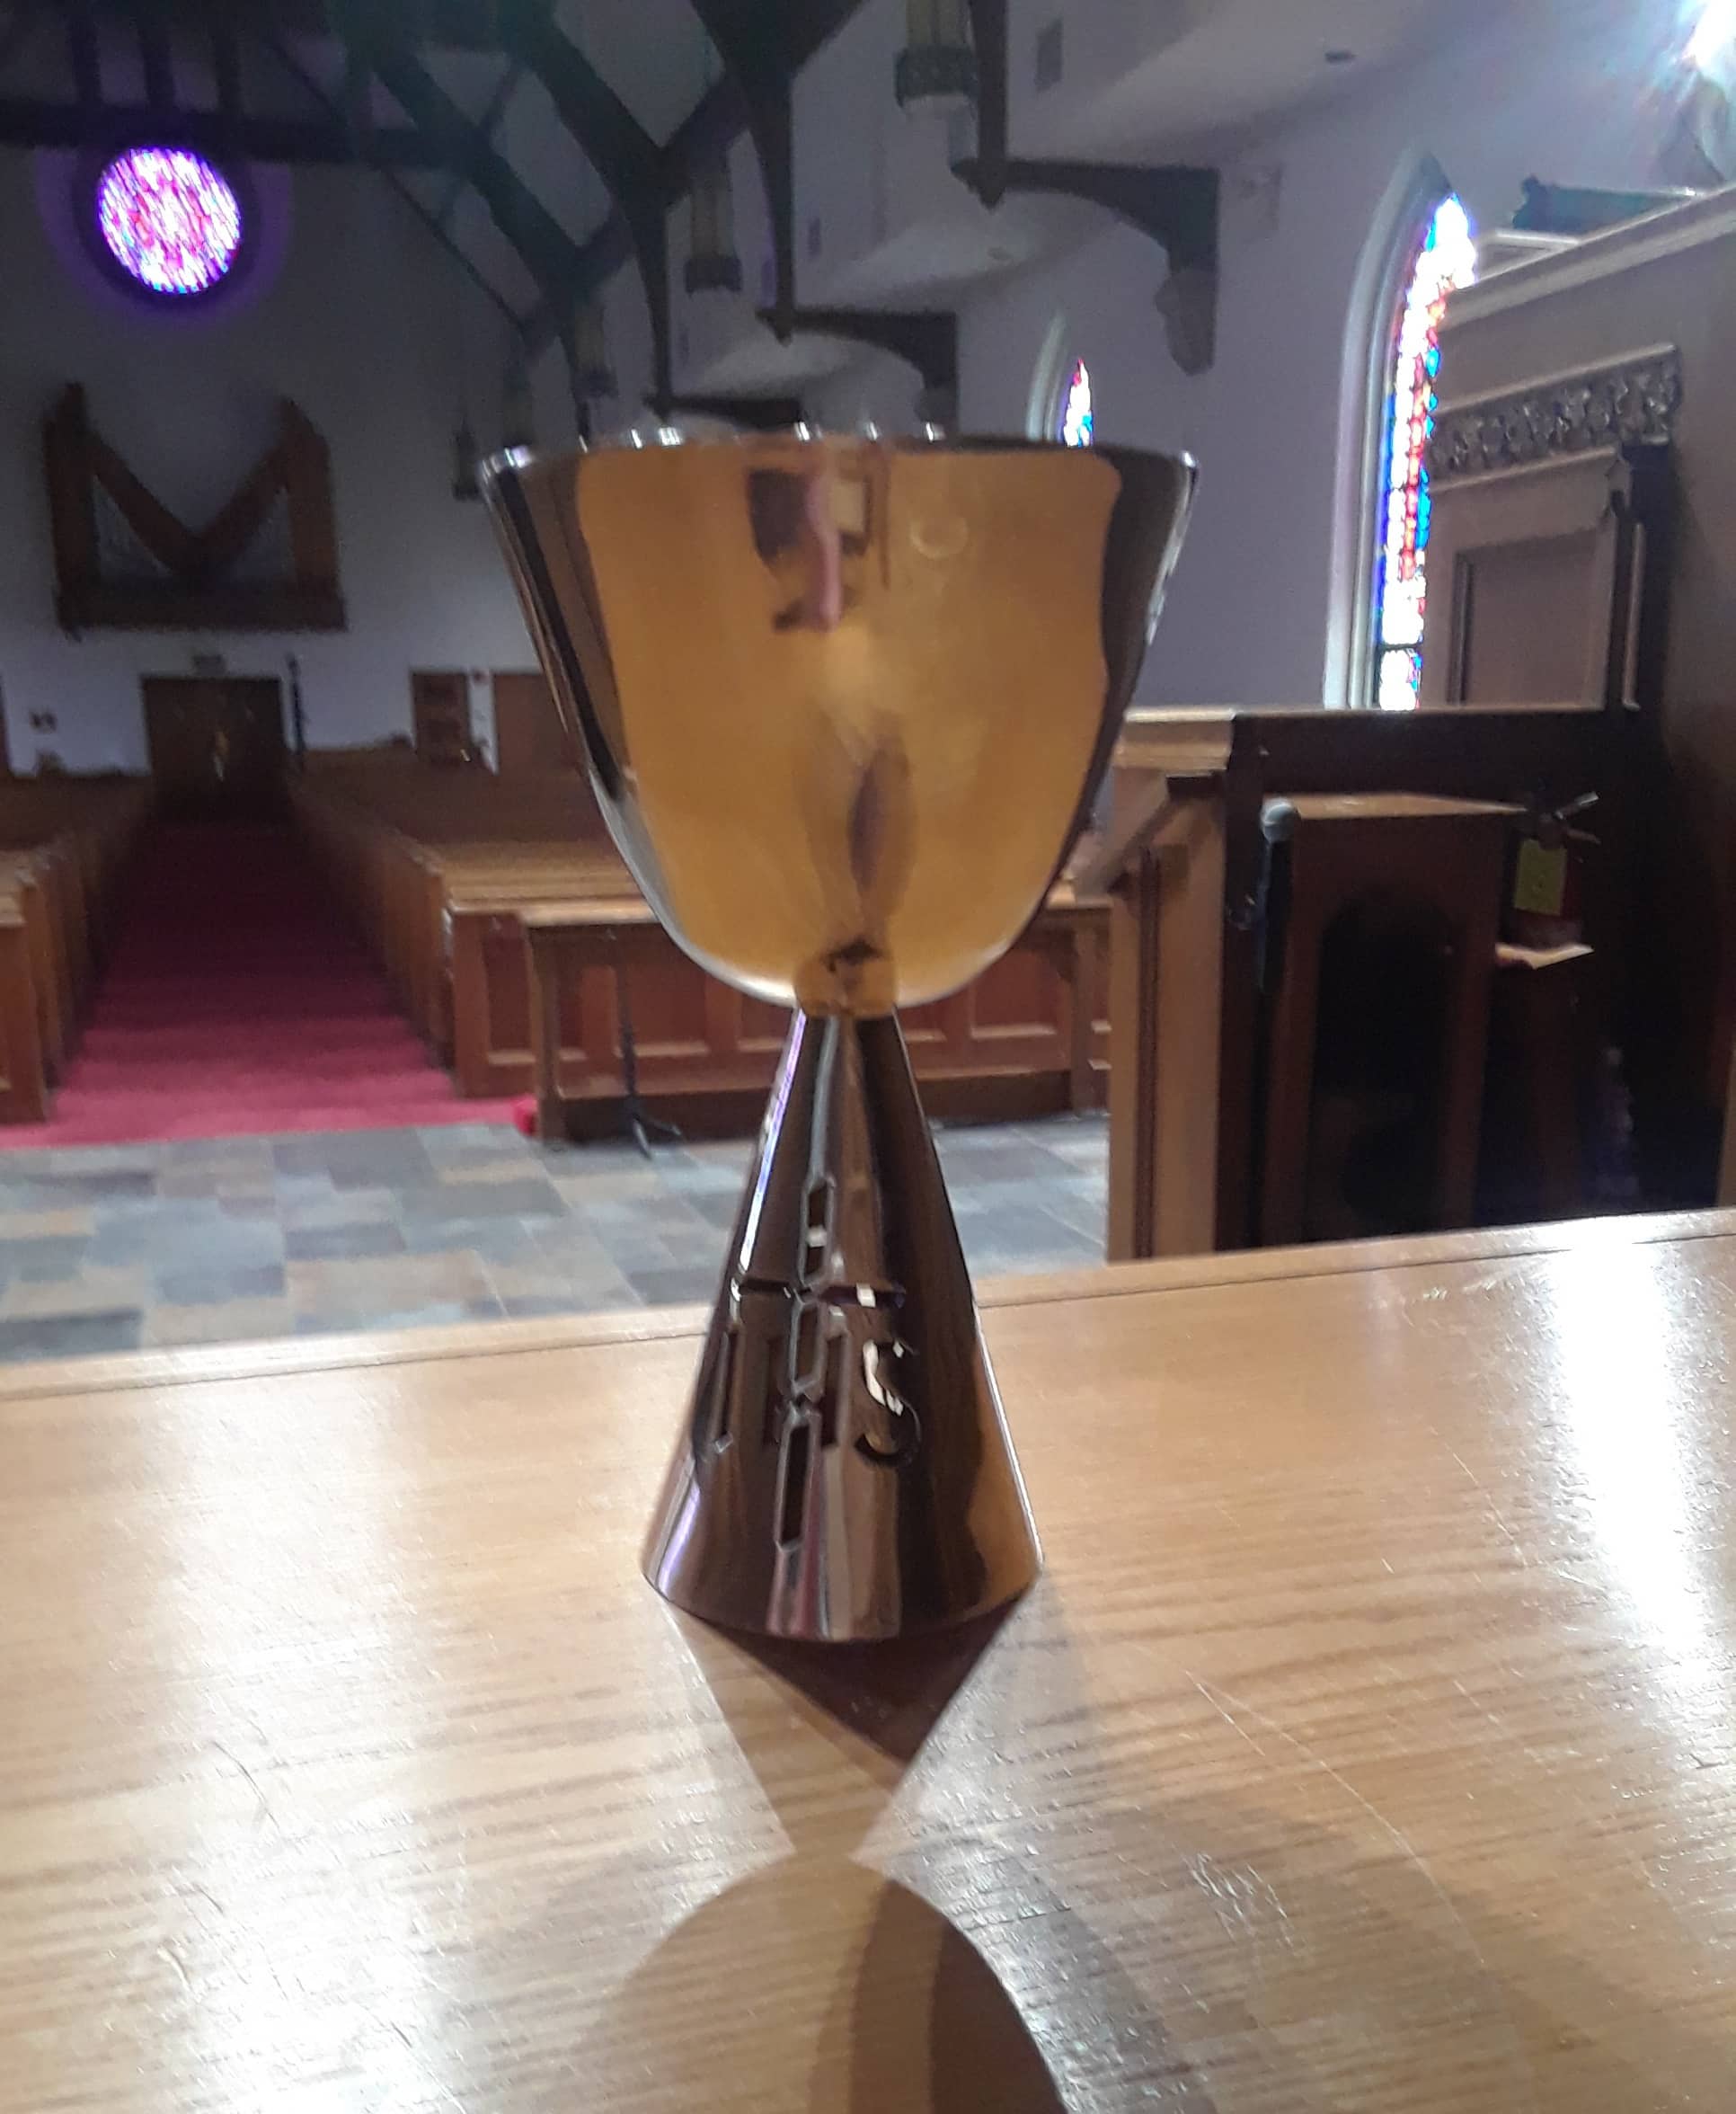 June’s Communion Chalice – A Husband’s Tribute to His Wife